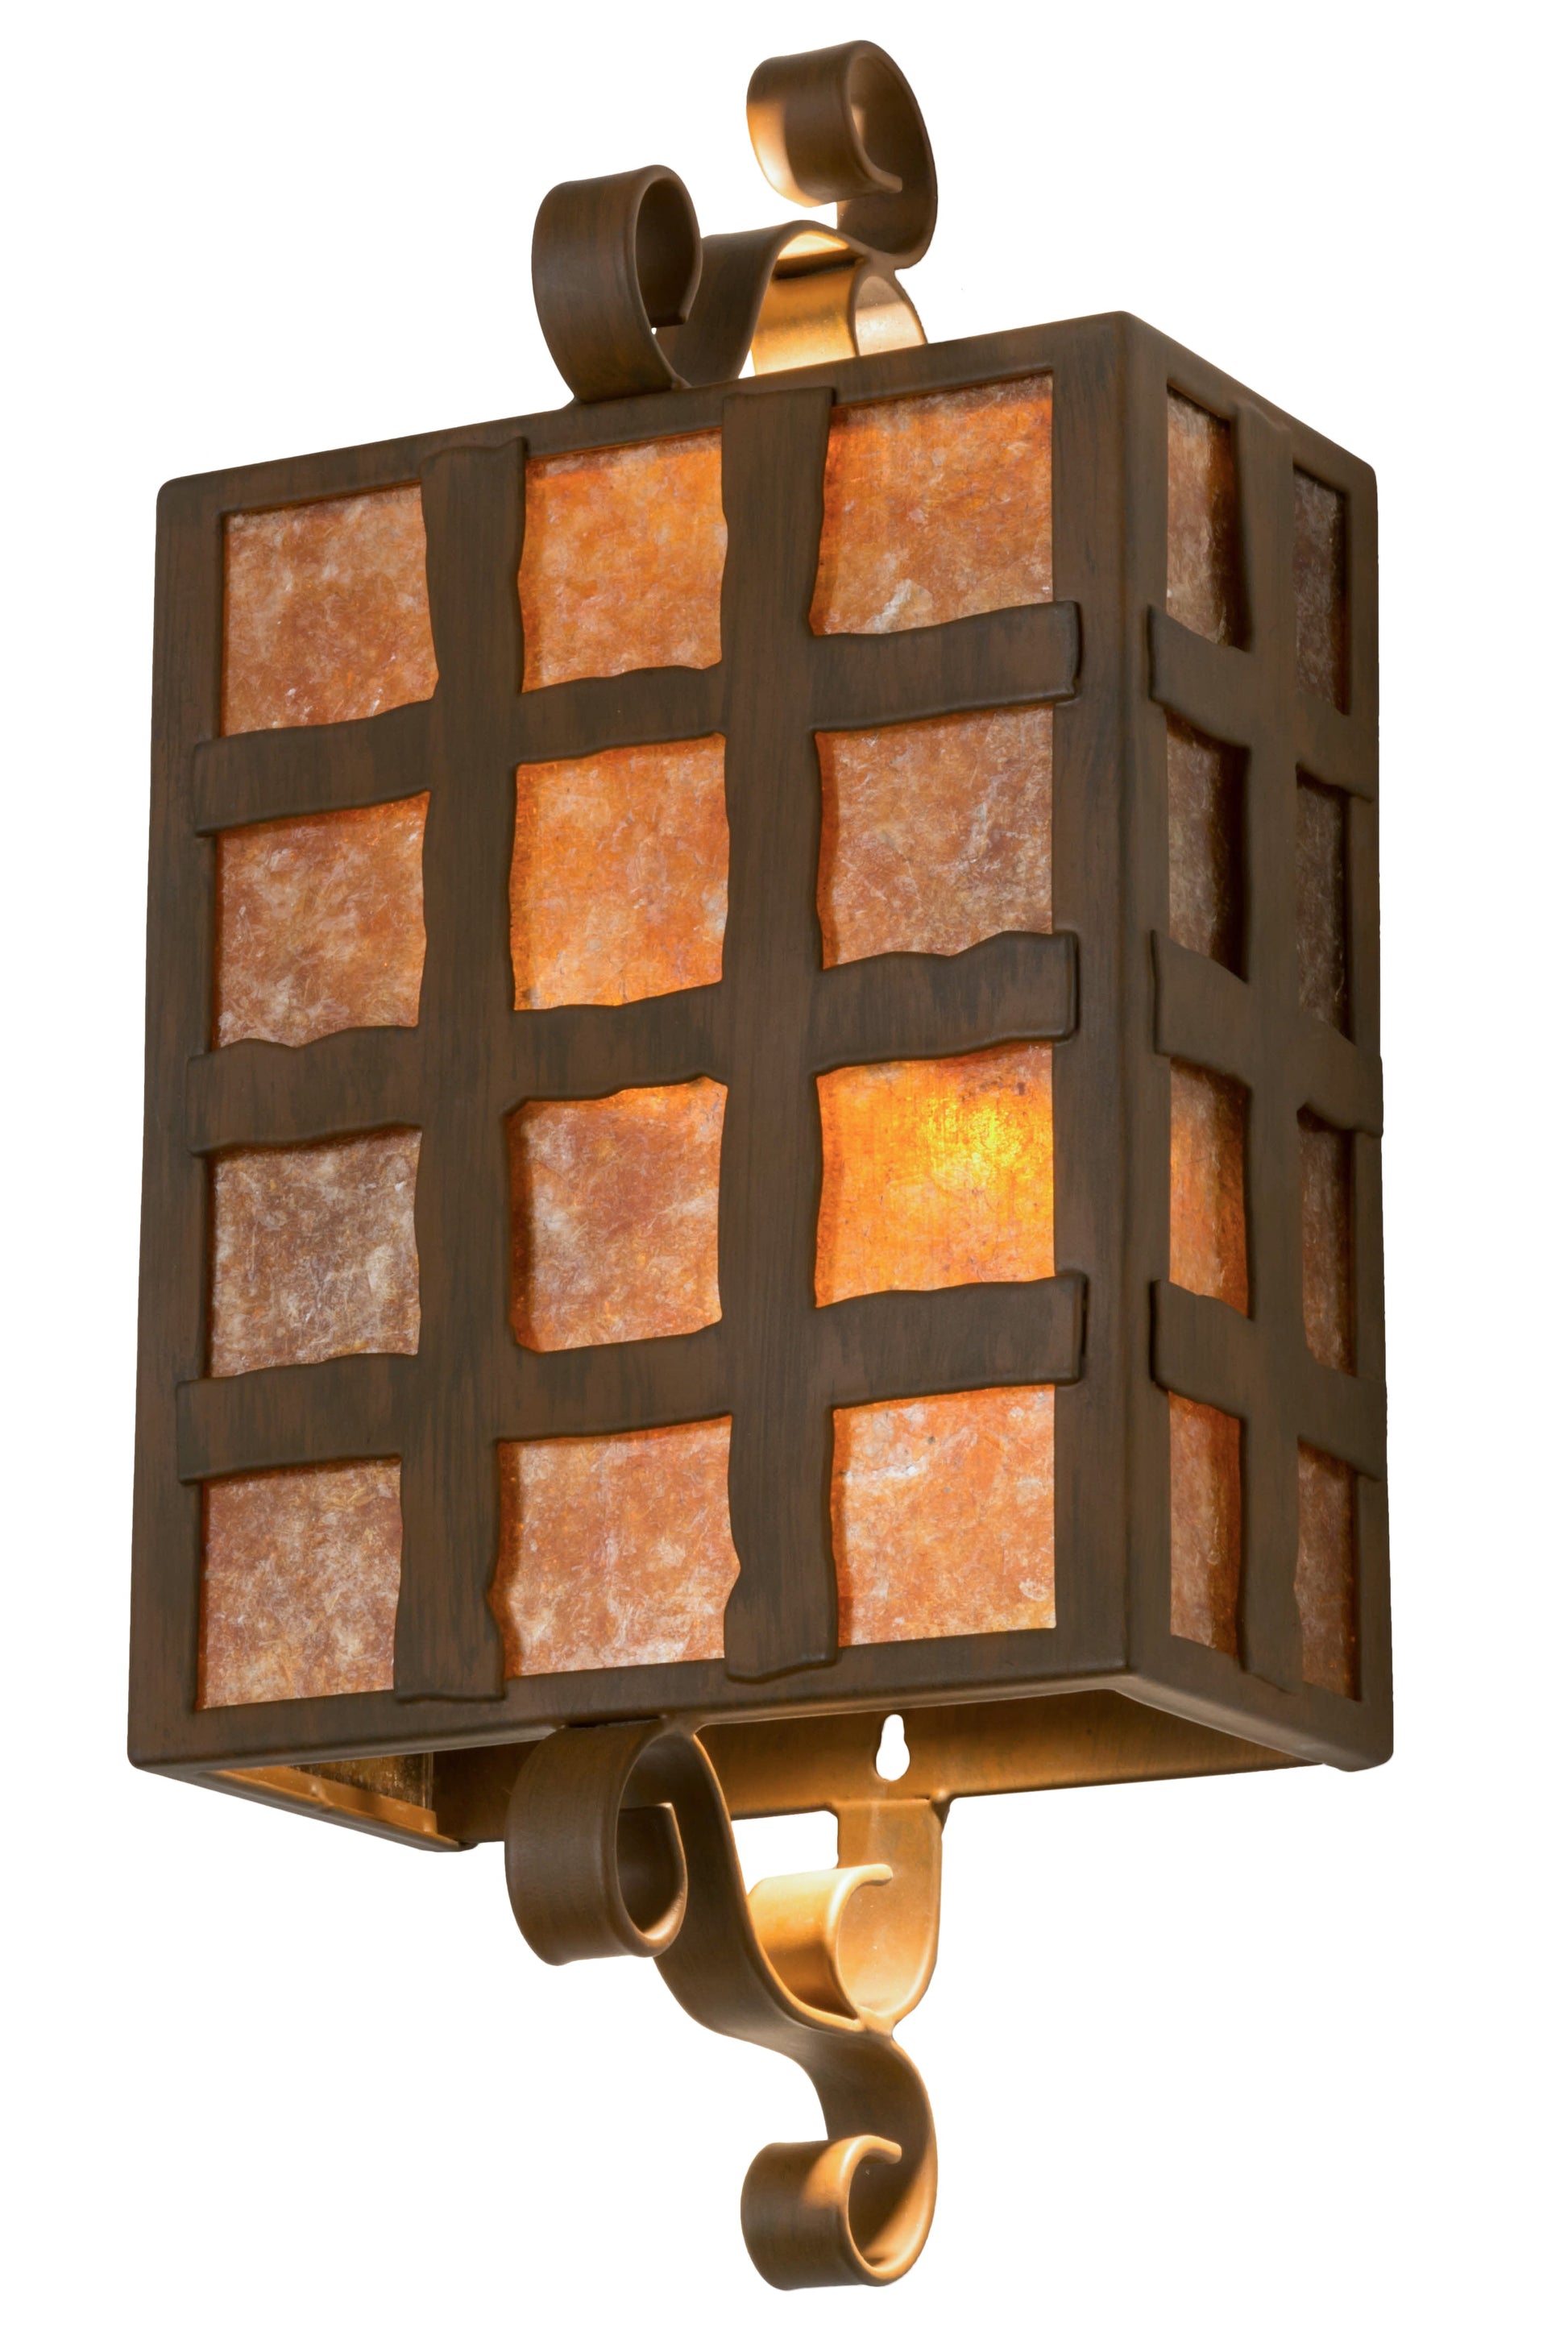 10" Monte Cristo Wall Sconce by 2nd Ave Lighting